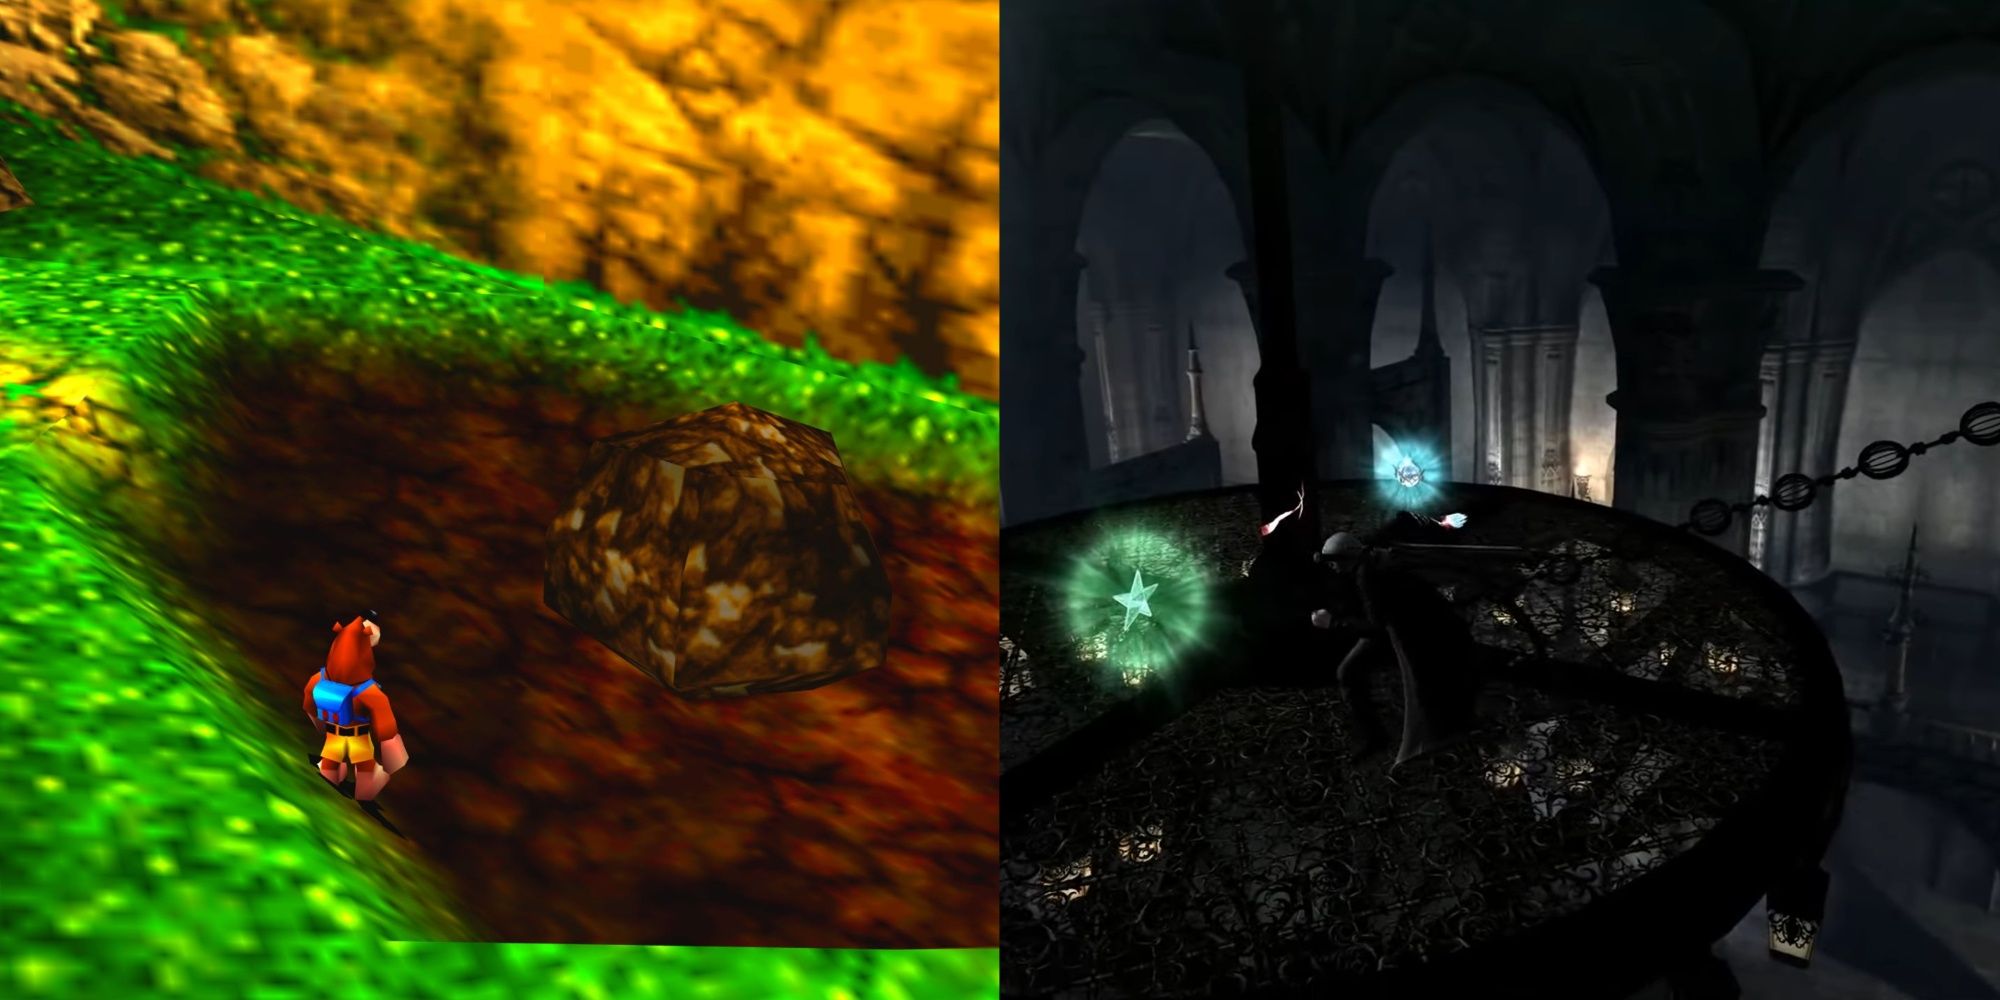 Boulder secret in Banjo-Tooie and hidden items in Devil May Cry 4.